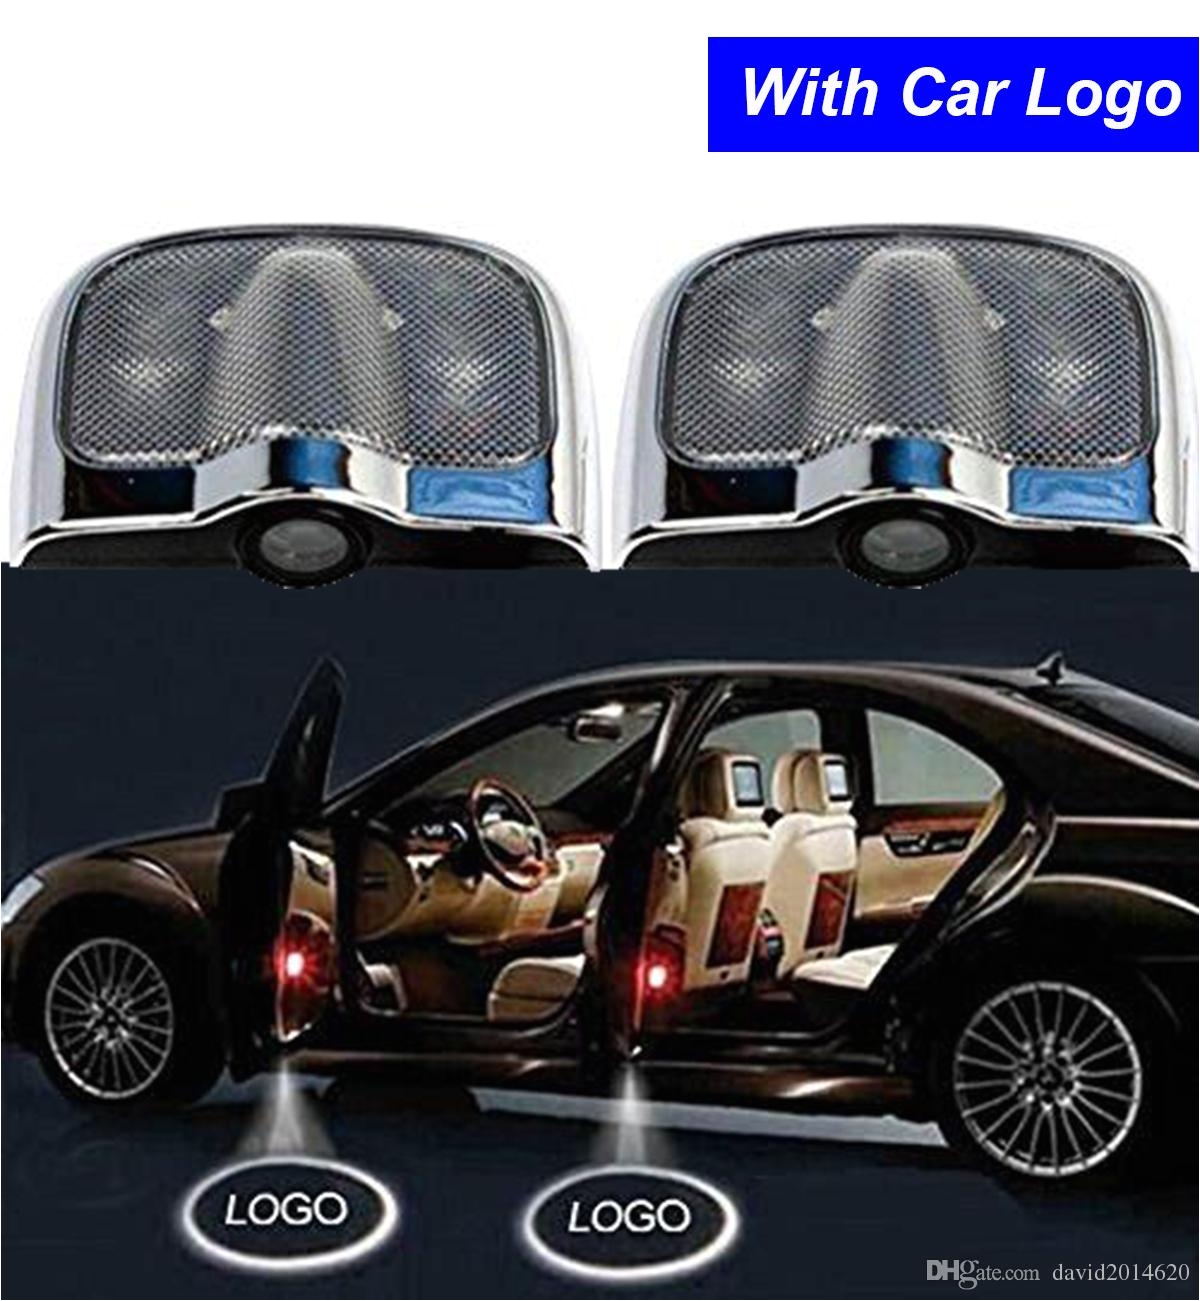 2018 led car door welcome projector logo ghost shadow laser emblem light for buick ford suzuki jeep fiat chevrolet kia from david2014620 5 02 dhgate com